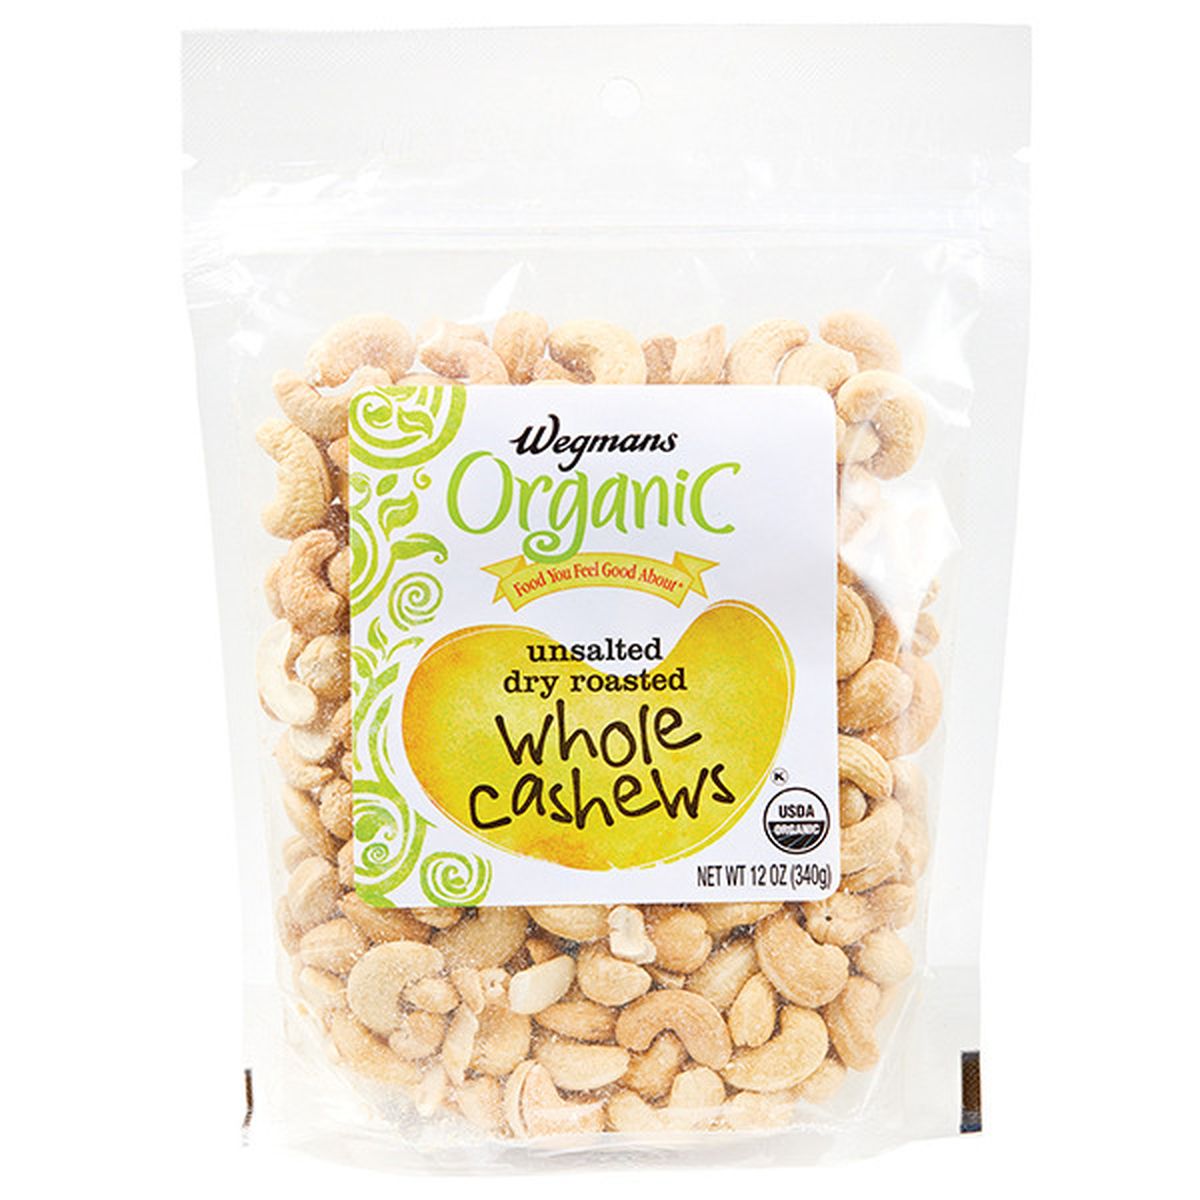 Calories in Wegmans Organic Unsalted Dry Roasted Whole Cashews